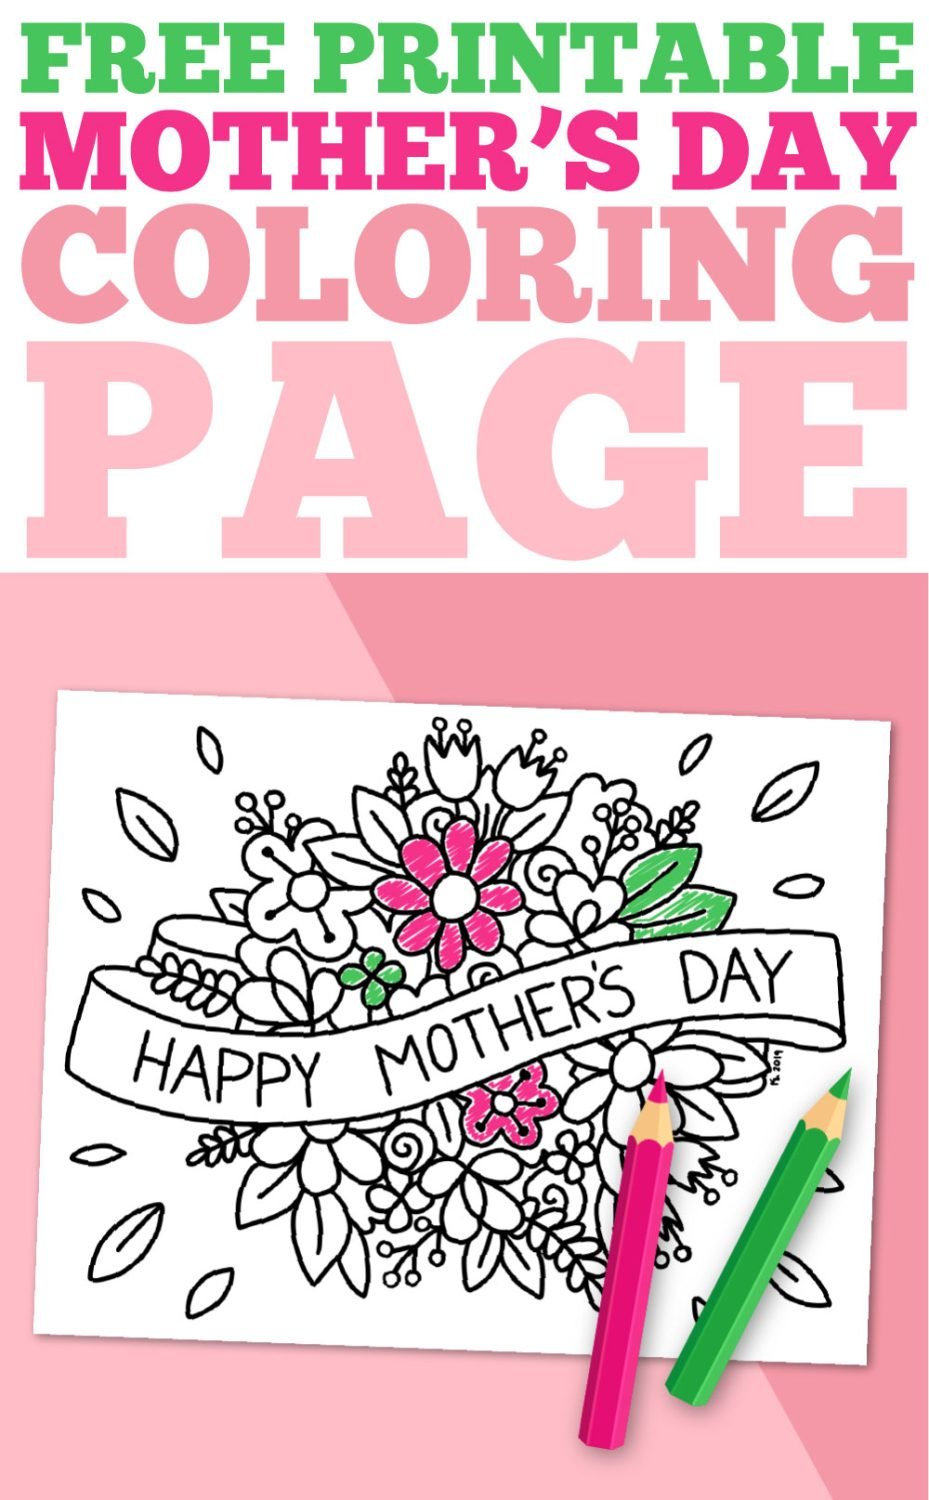 Mother's Day coloring page pin image